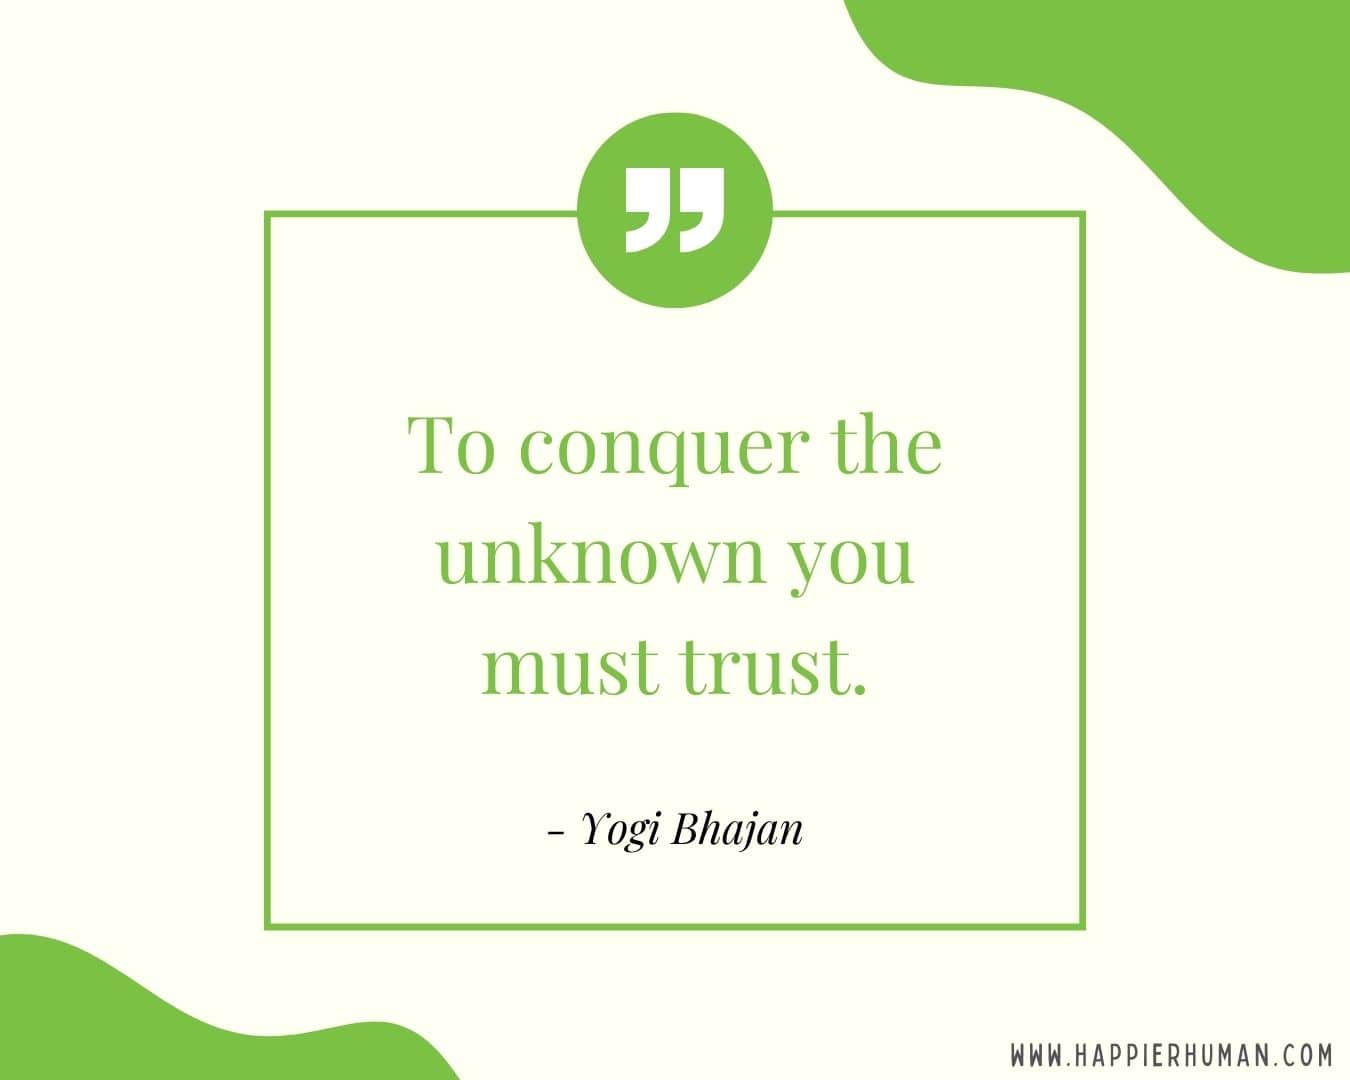 Broken Trust Quotes - “To conquer the unknown you must trust.” - Yogi Bhajan